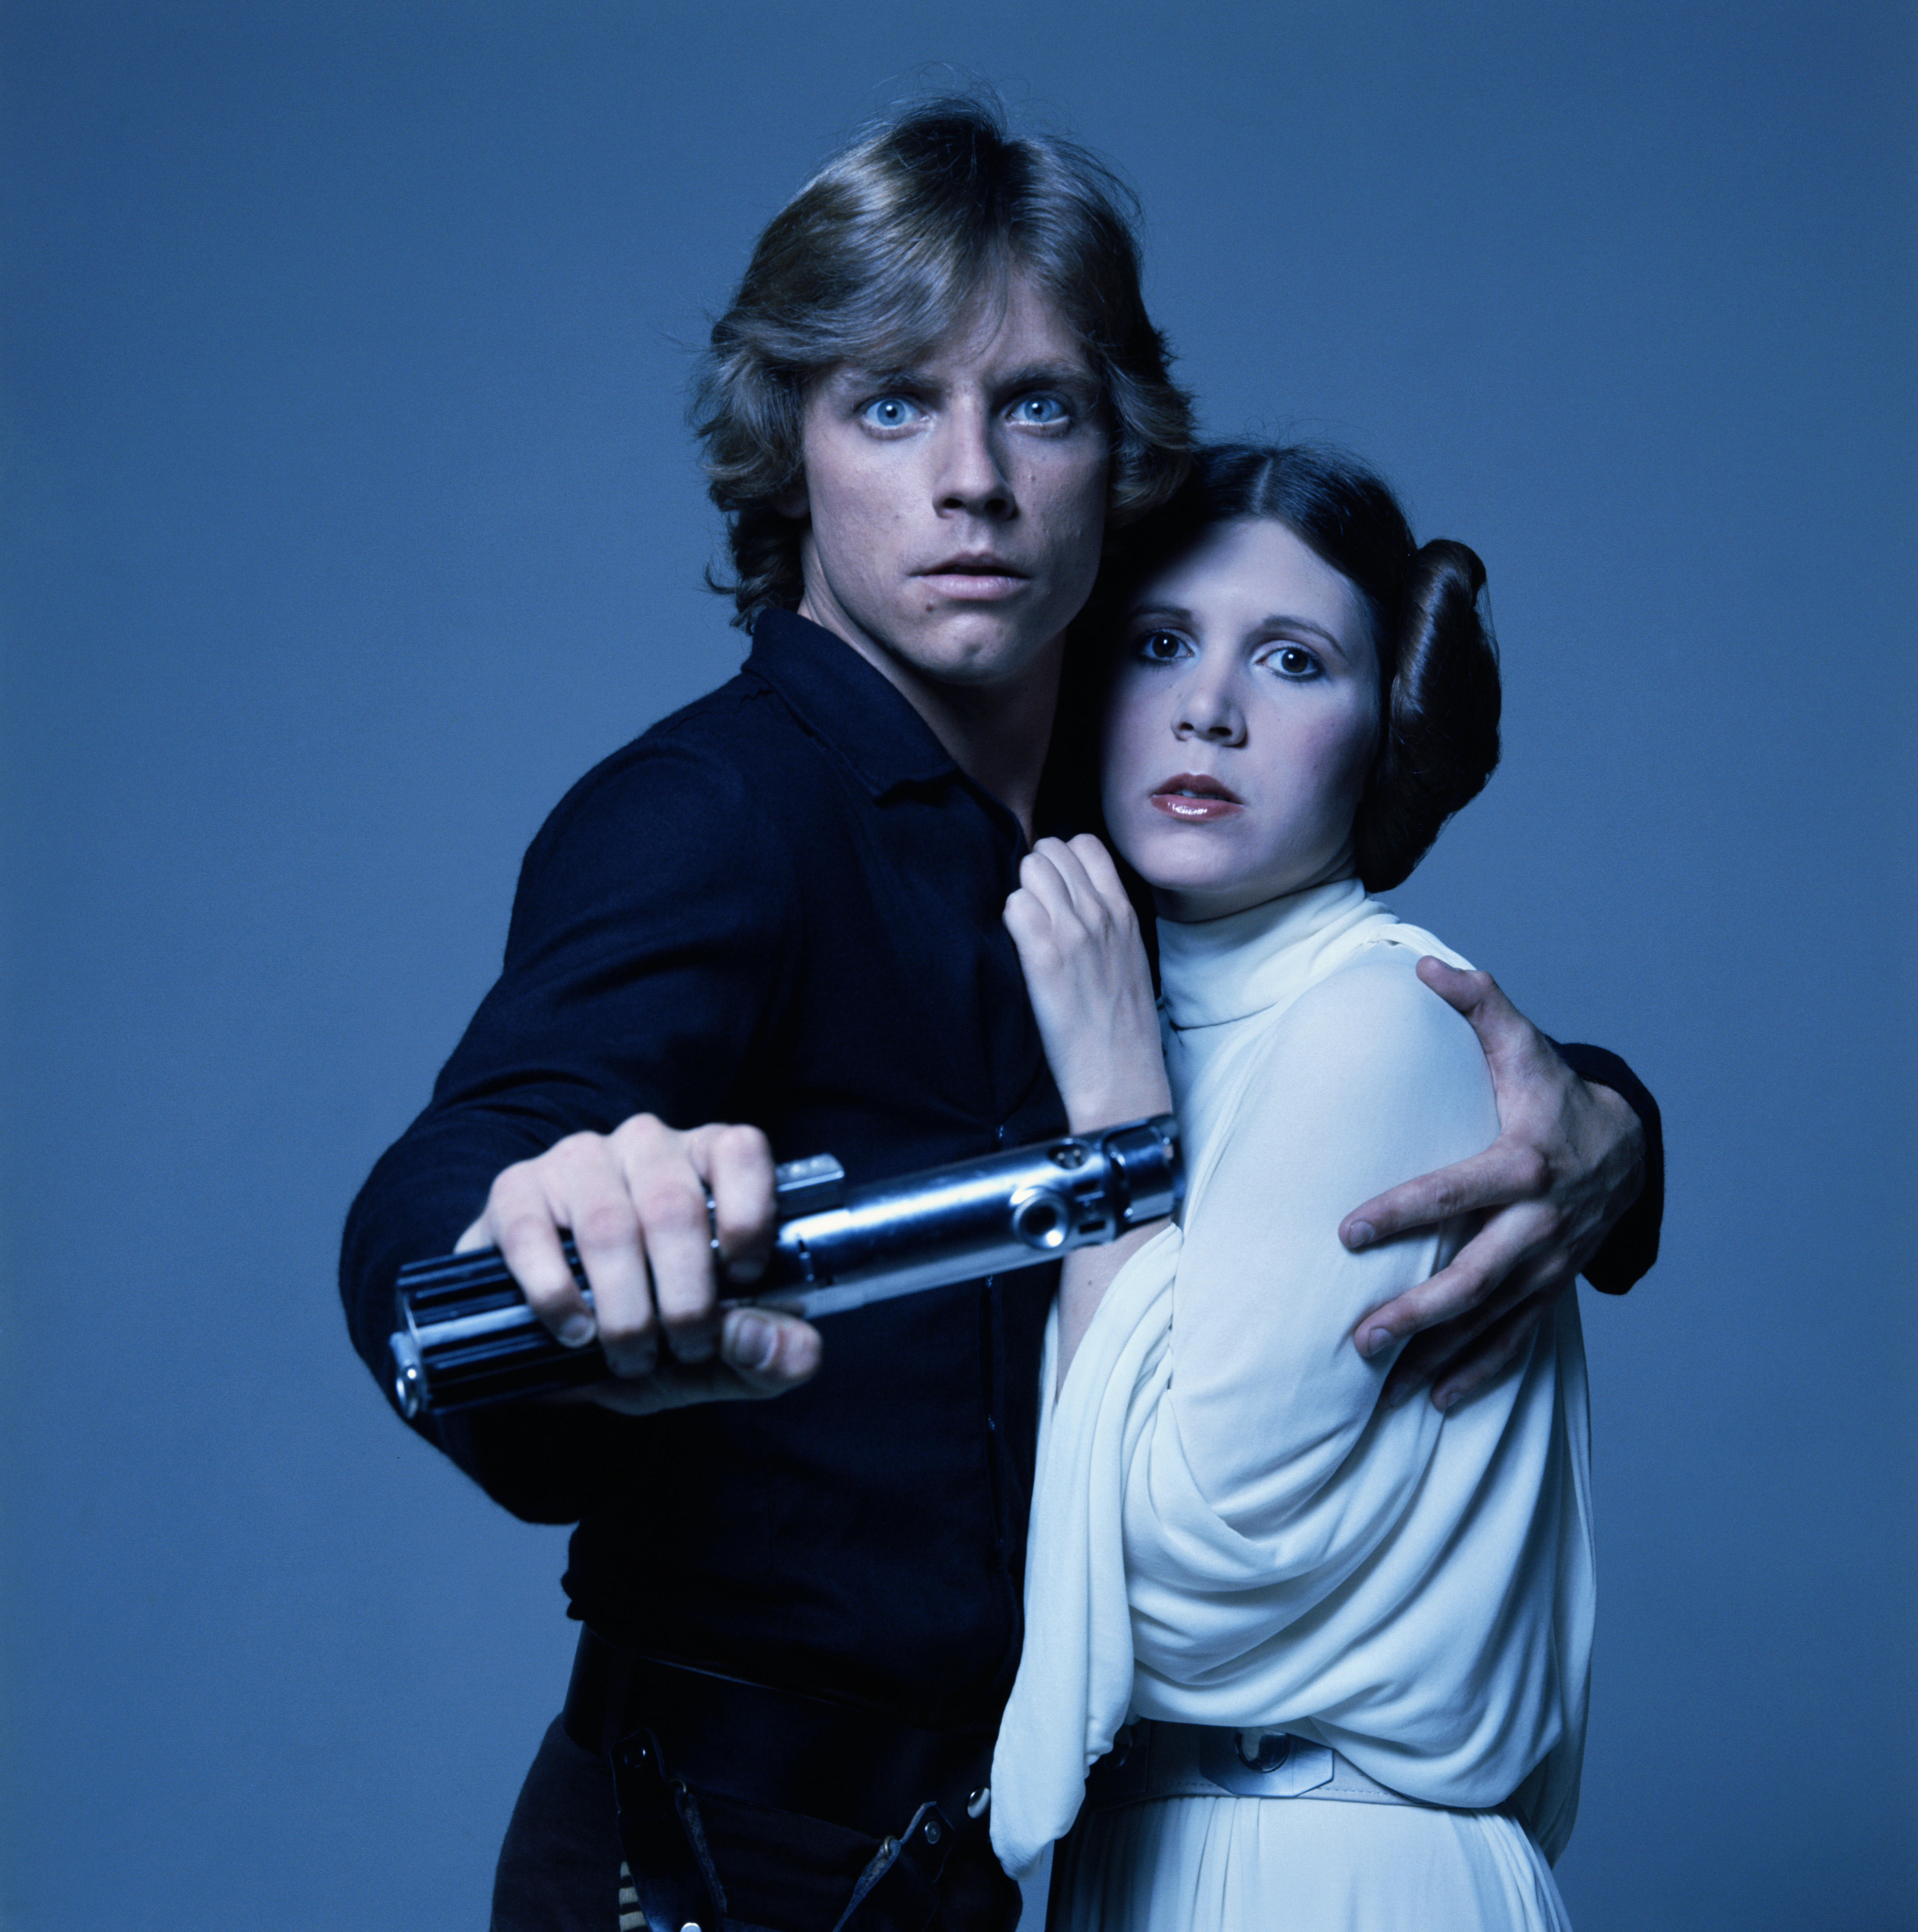 American actors Mark Hamill and Carrie Fisher in costume as brother and sister Luke Skywalker and Princess Leia in George Lucas' Star Wars trilogy, 1977. (Terry O'Neill—Getty Images)